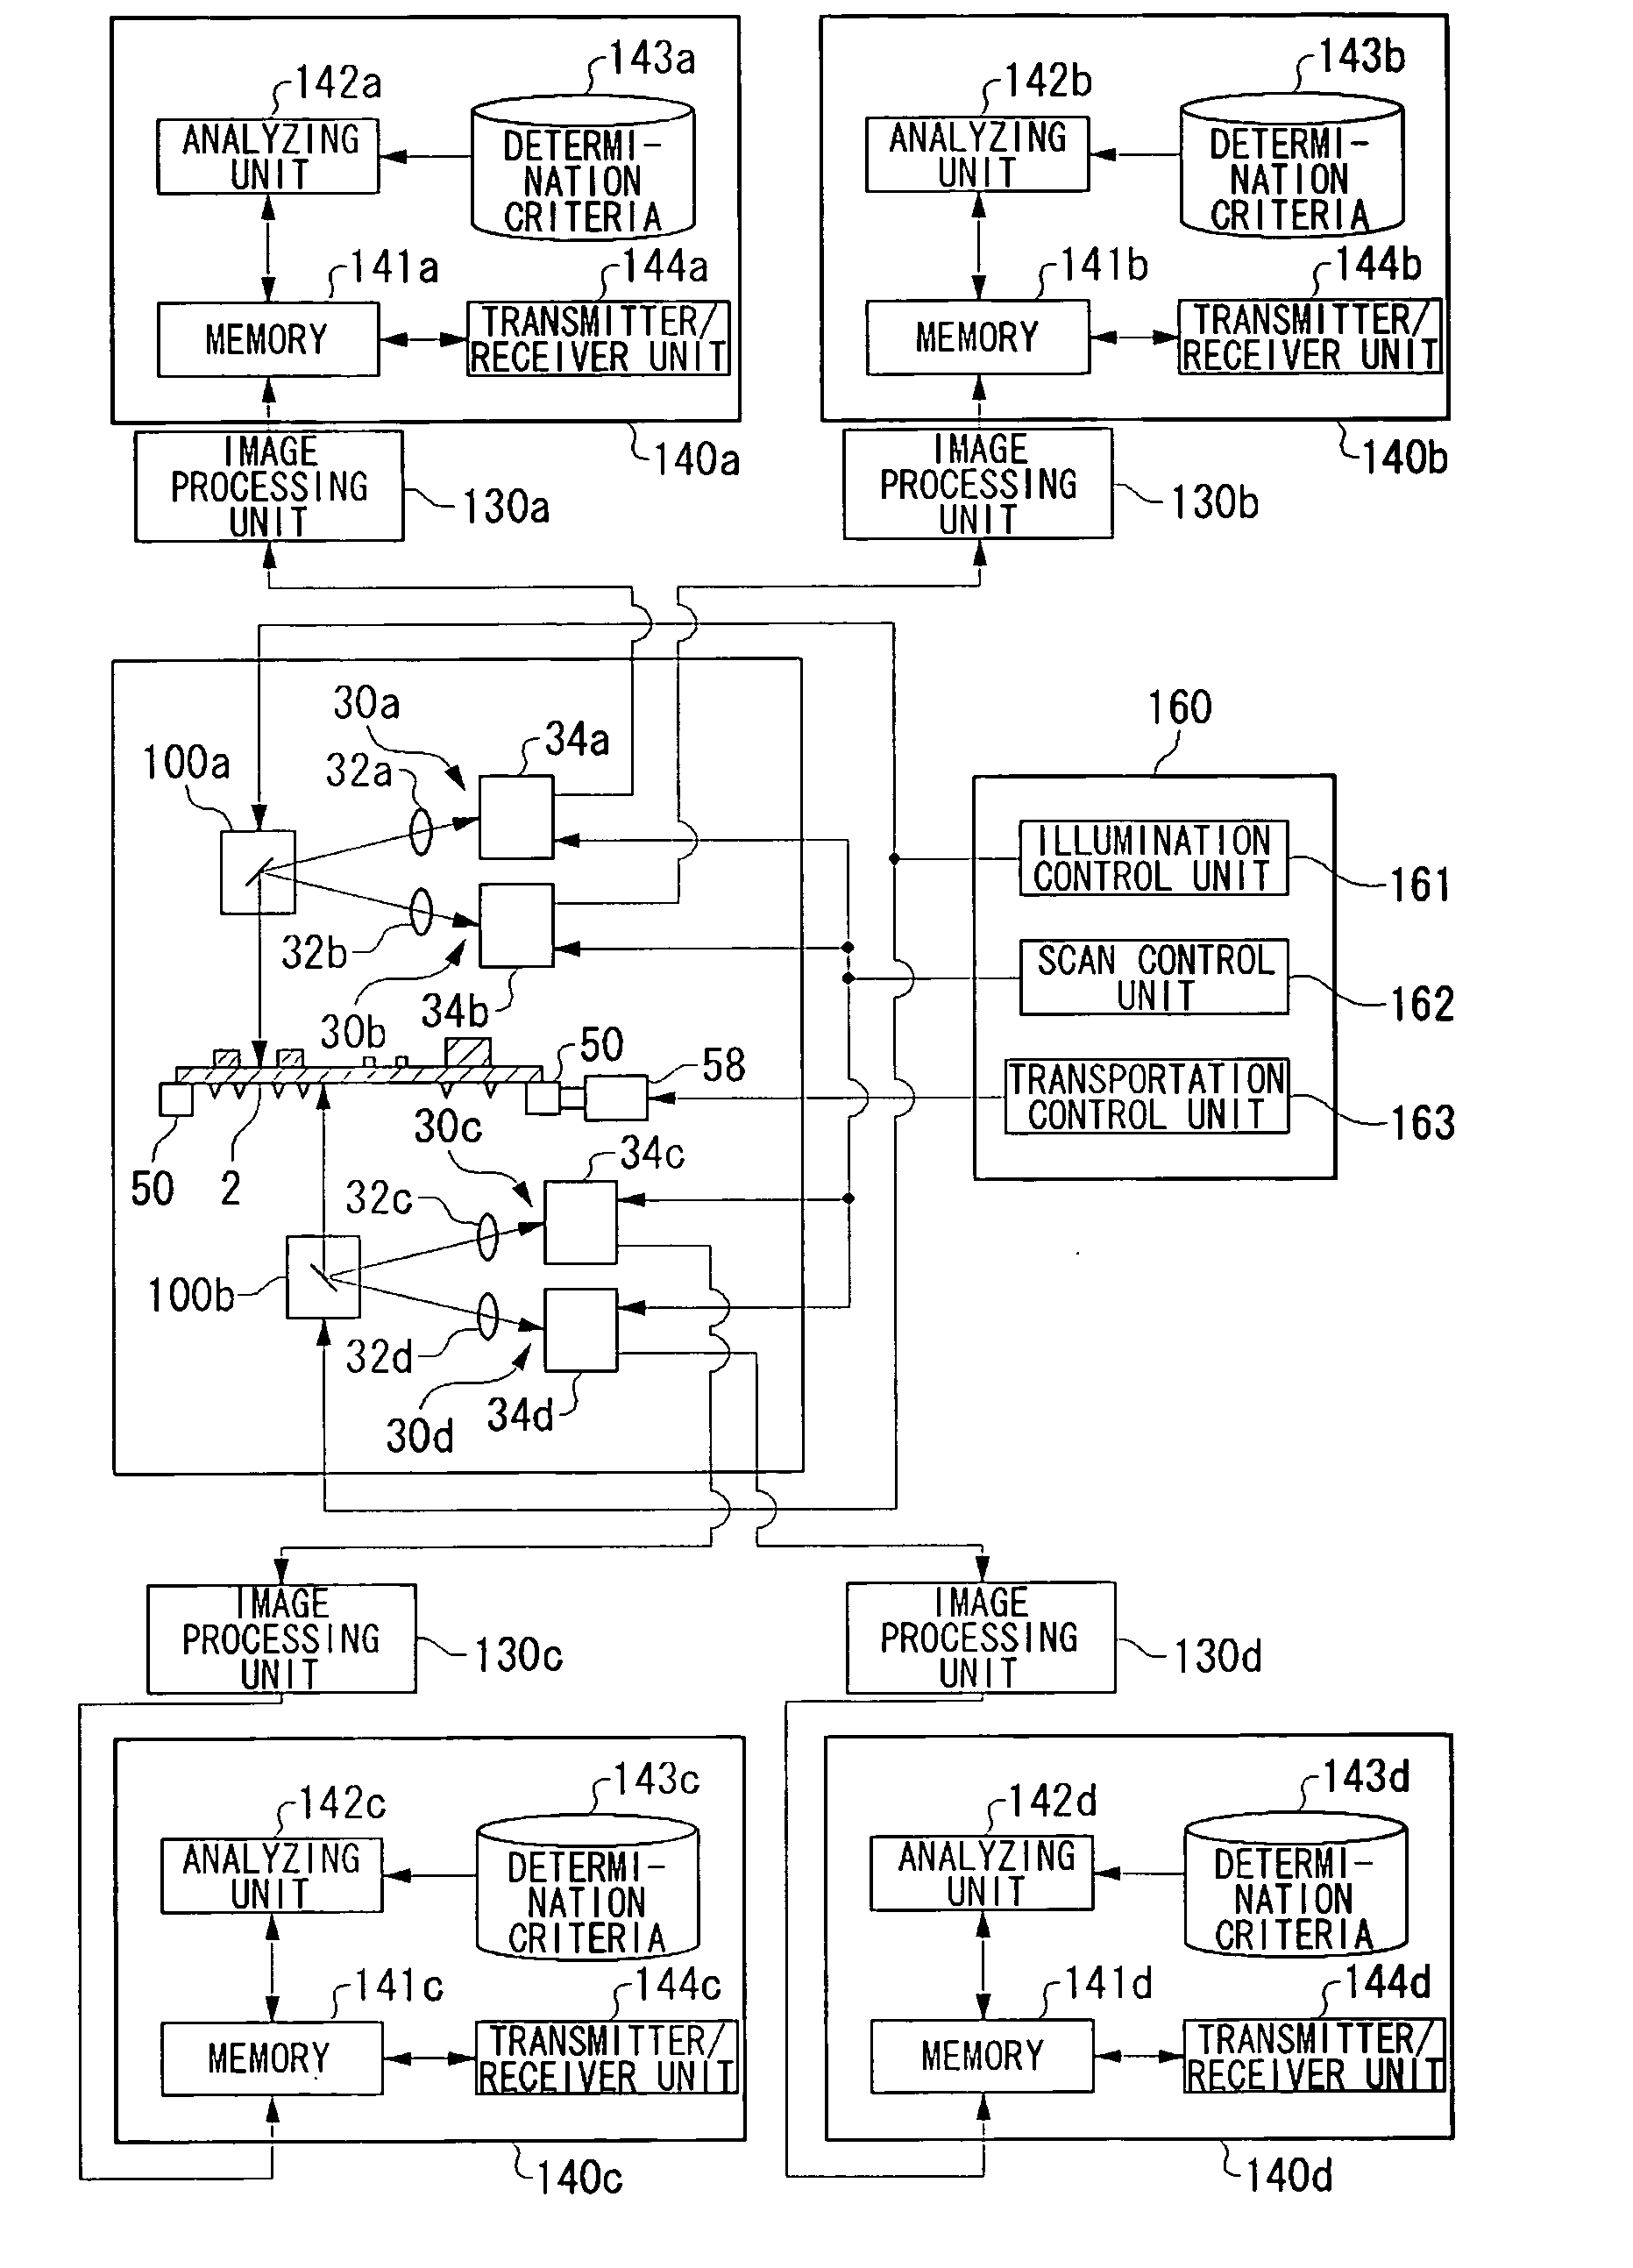 Appearance inspection apparatus for inspecting inspection piece